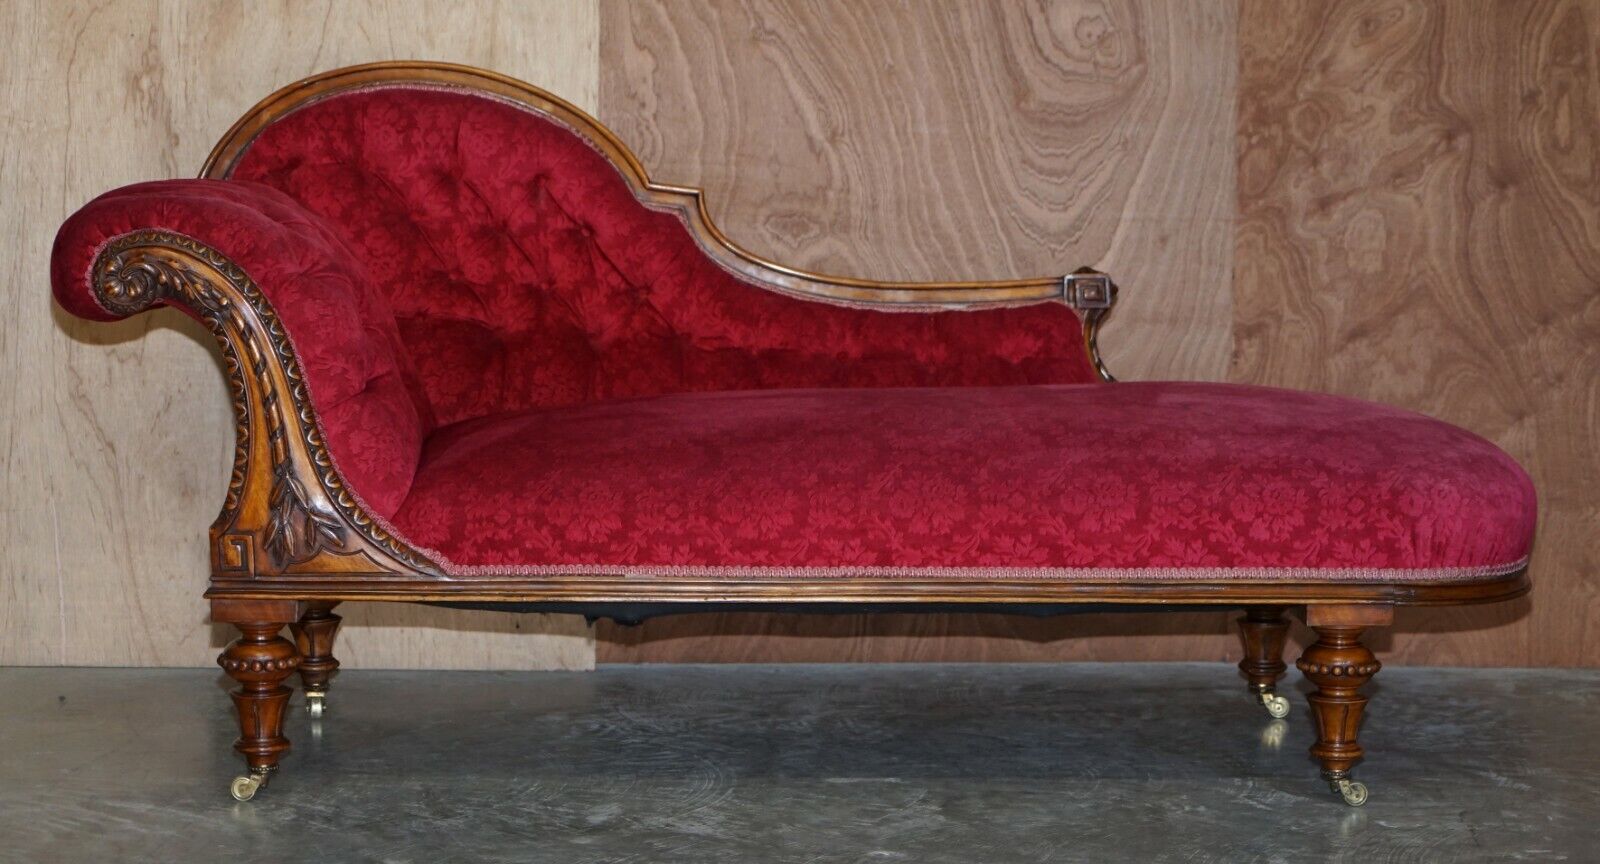 RESTORED ANTIQUE HOWARD & SON'S BERNERS STREET CHESTERFIELD CHAISE LOUNGE  SOFA - Royal House Antiques